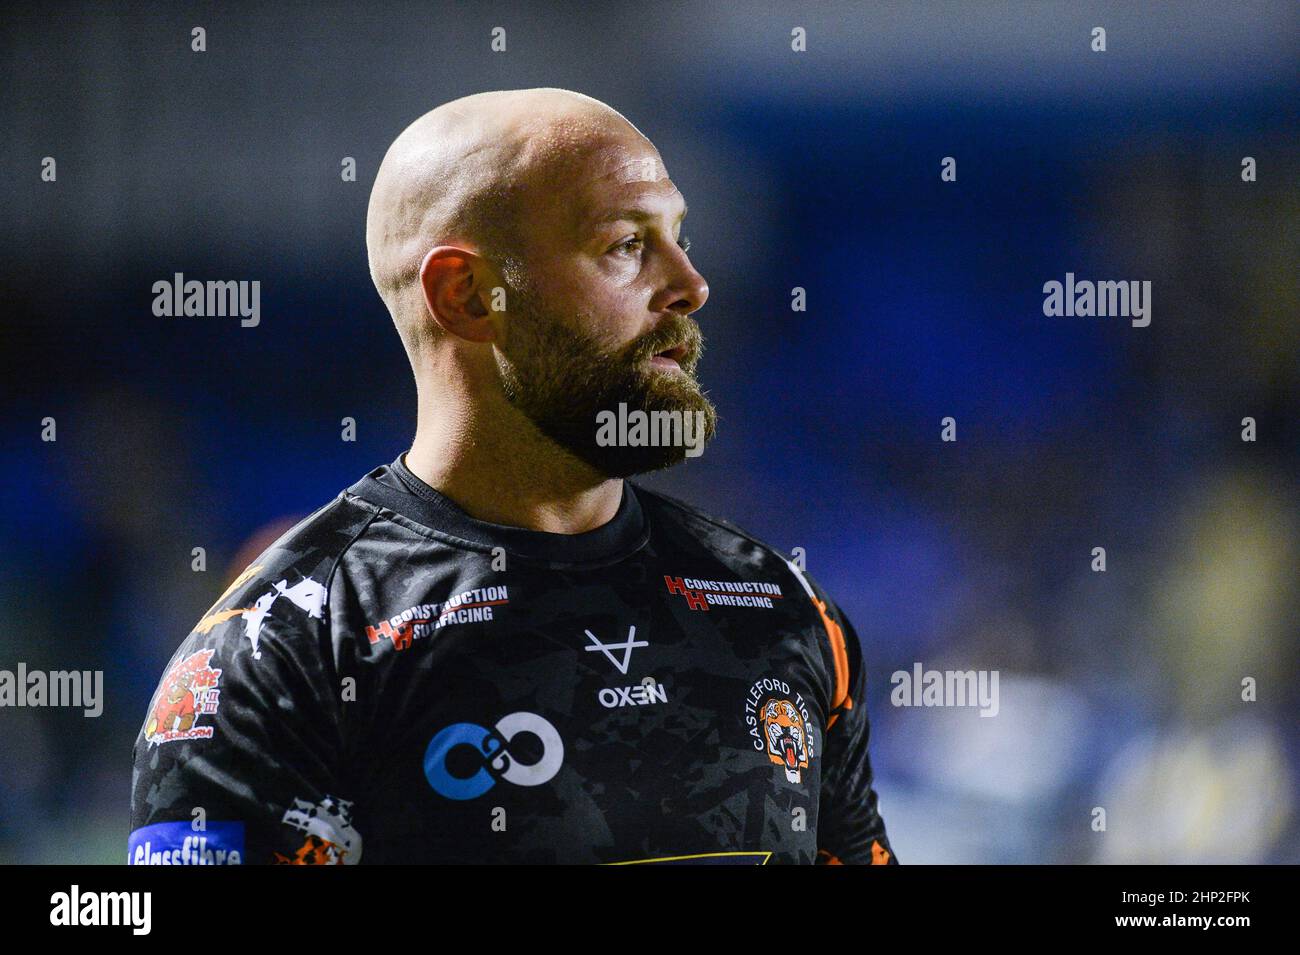 Warrington, England - 17 February 2022 - Paul McShane of Castleford Tigers during the Rugby League Betfred Super League Round 2 Warrington Wolves vs Castleford Tigers at Halliwell Jones Stadium, Warrington, UK  Dean Williams Stock Photo